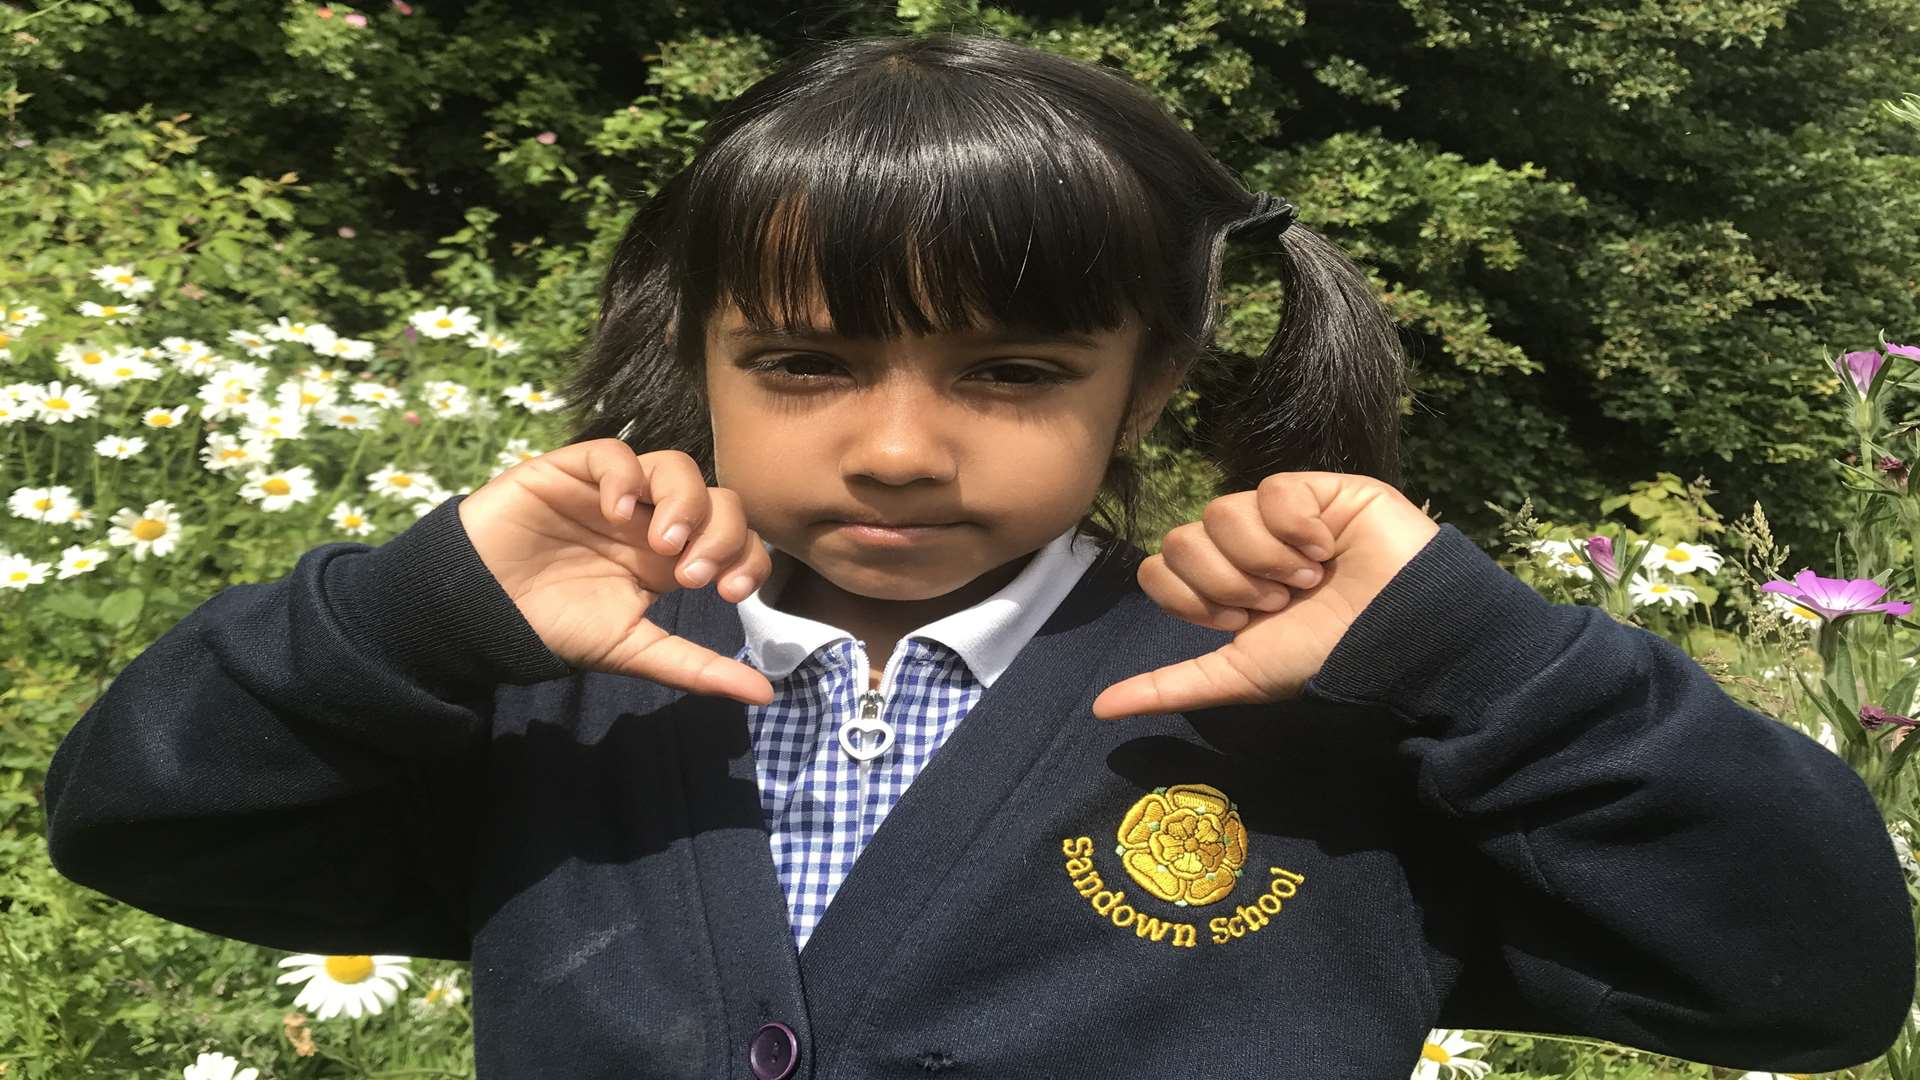 Aarani Shanger, six, is devastated about the vandal attack on her school